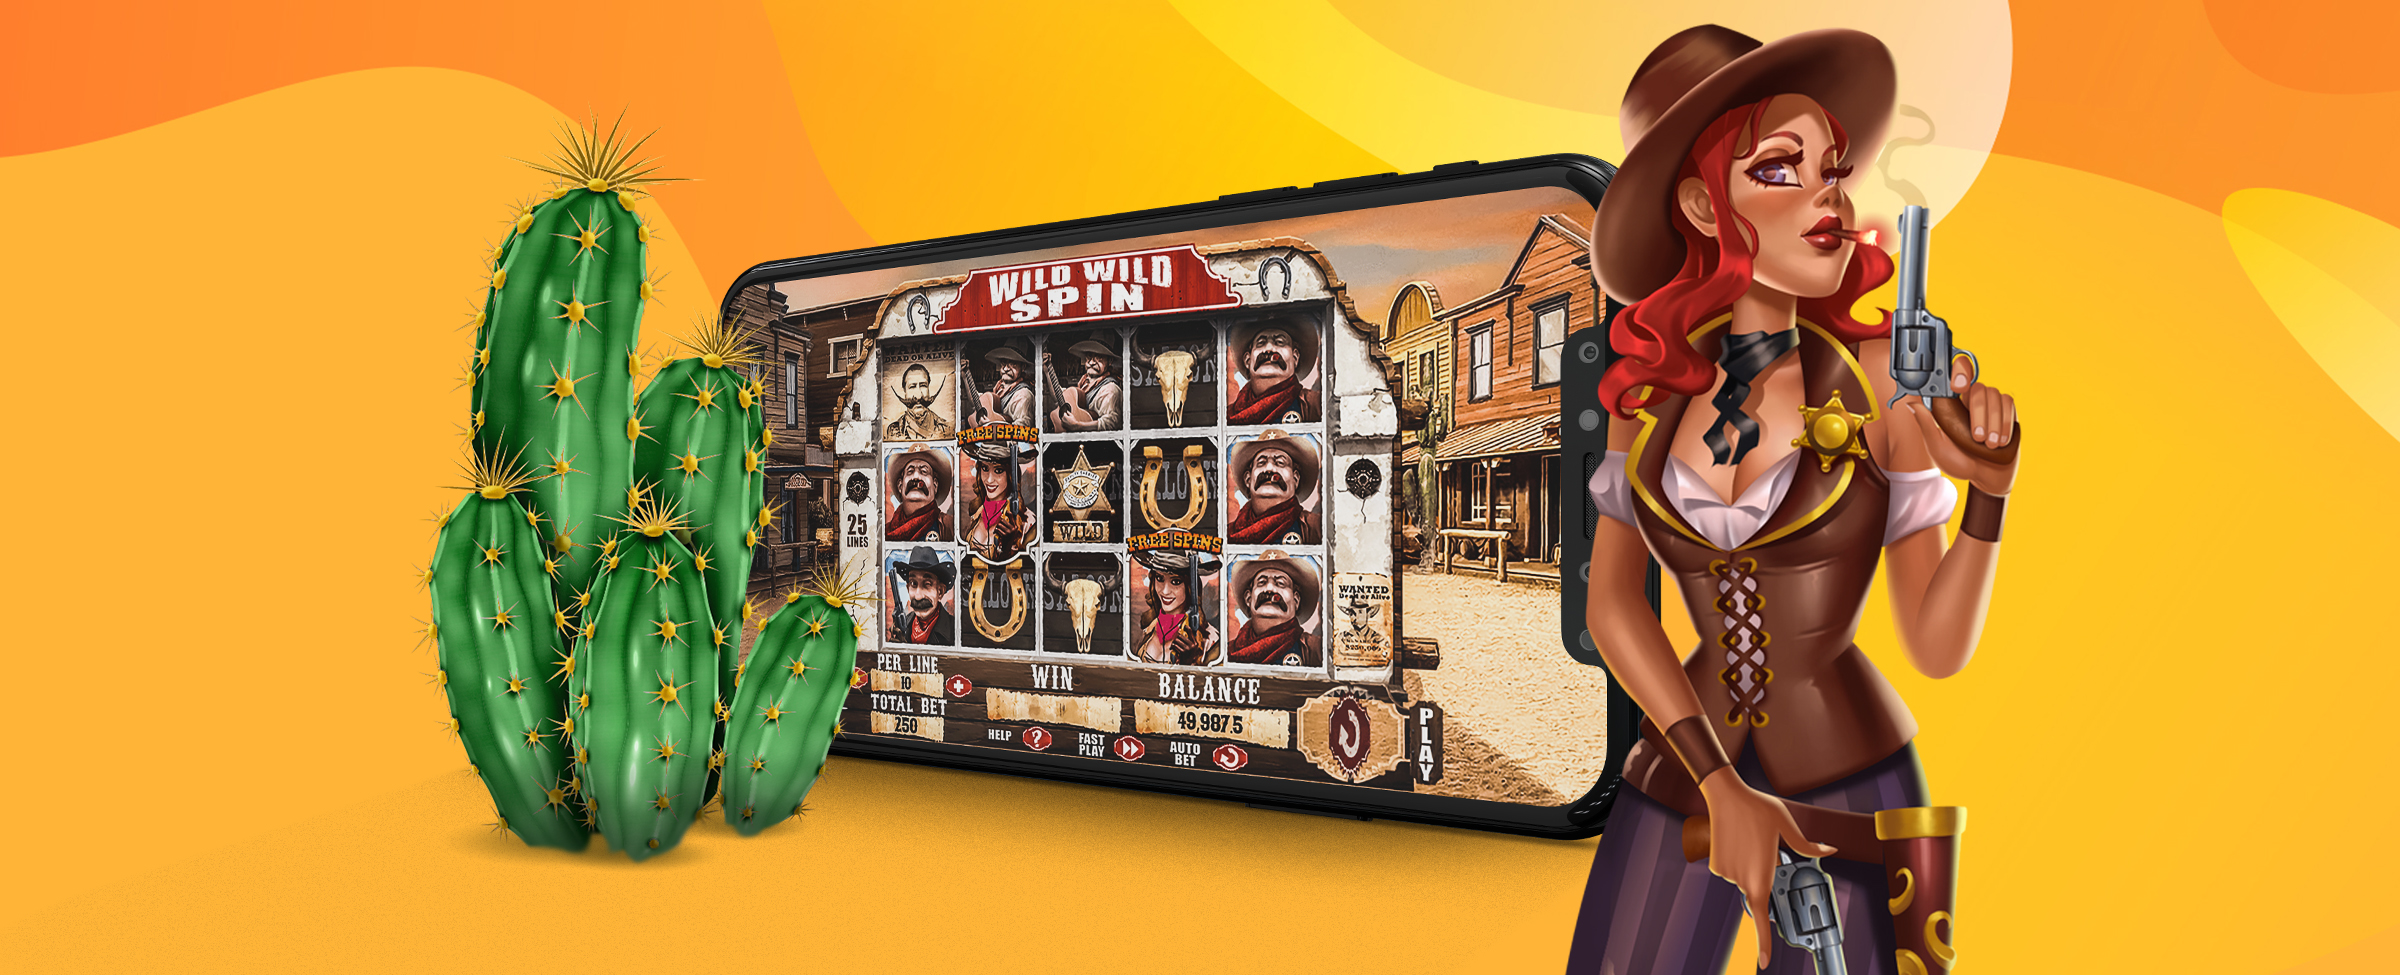 The Wild West is arguably one of our most loved themes at SlotsLV. If you’re brave enough to venture out into the open, try Lawless Ladies and Wild Wild Spin – guaranteed to keep your gaming action at peak level!